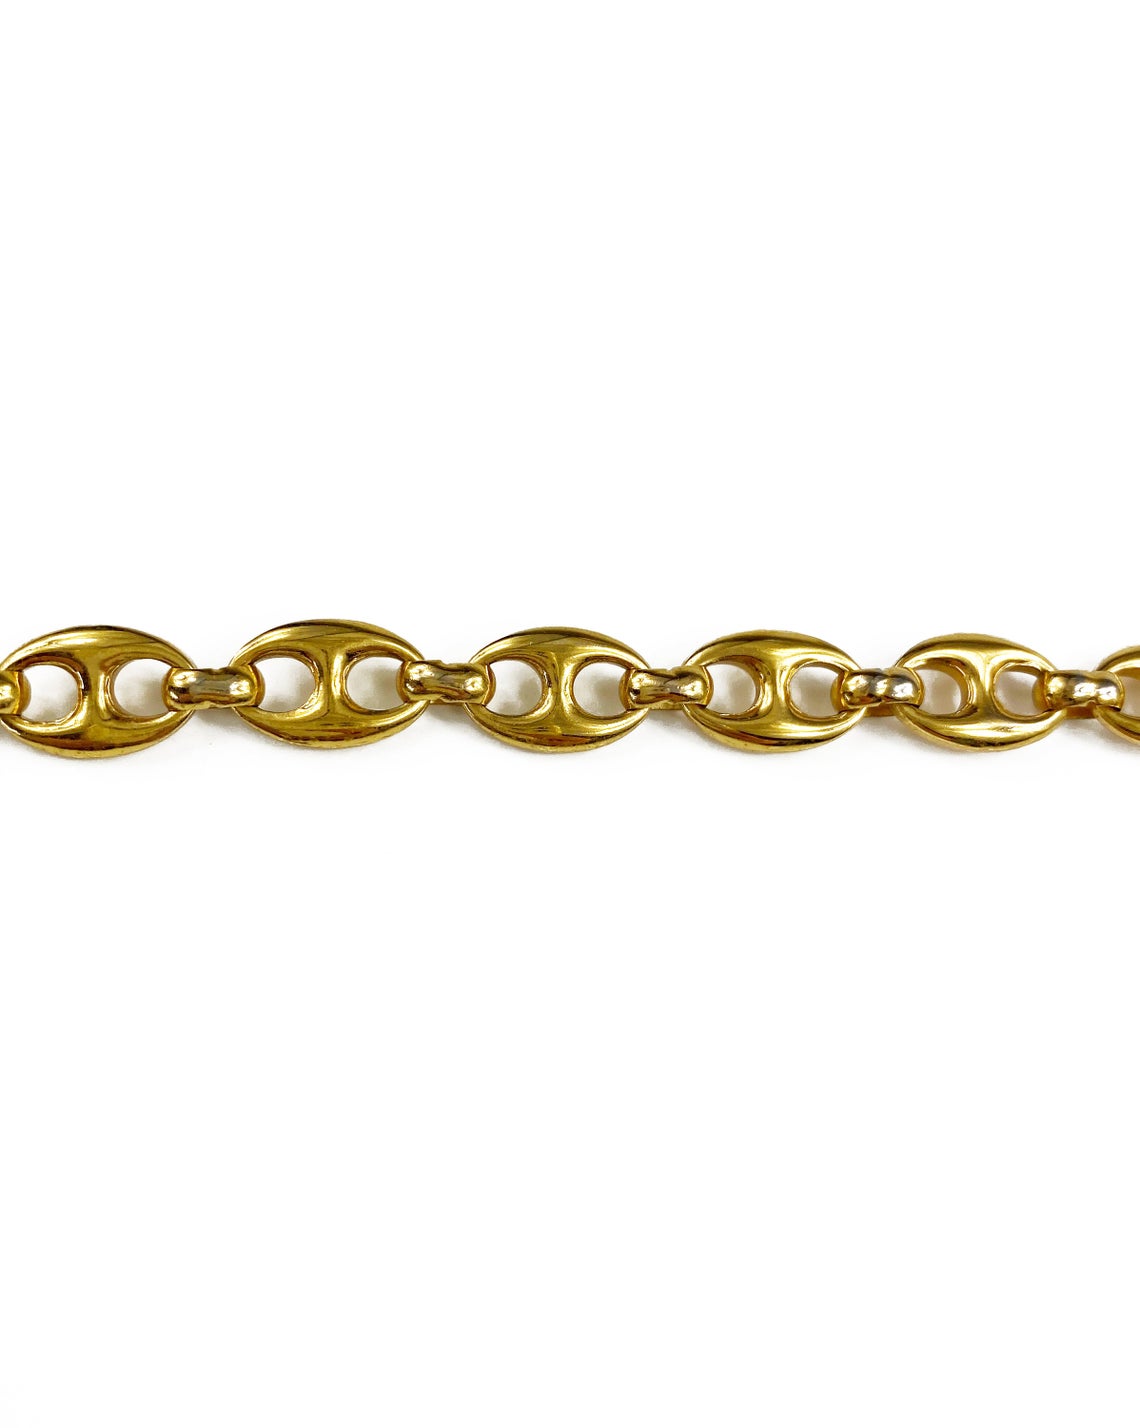 Fruit Vintage Gucci 1980s logo chain belt in classic gold. Features a lobster clip closure and significant logo drop Gucci GG charm. Looks incredible when worn as a necklace.